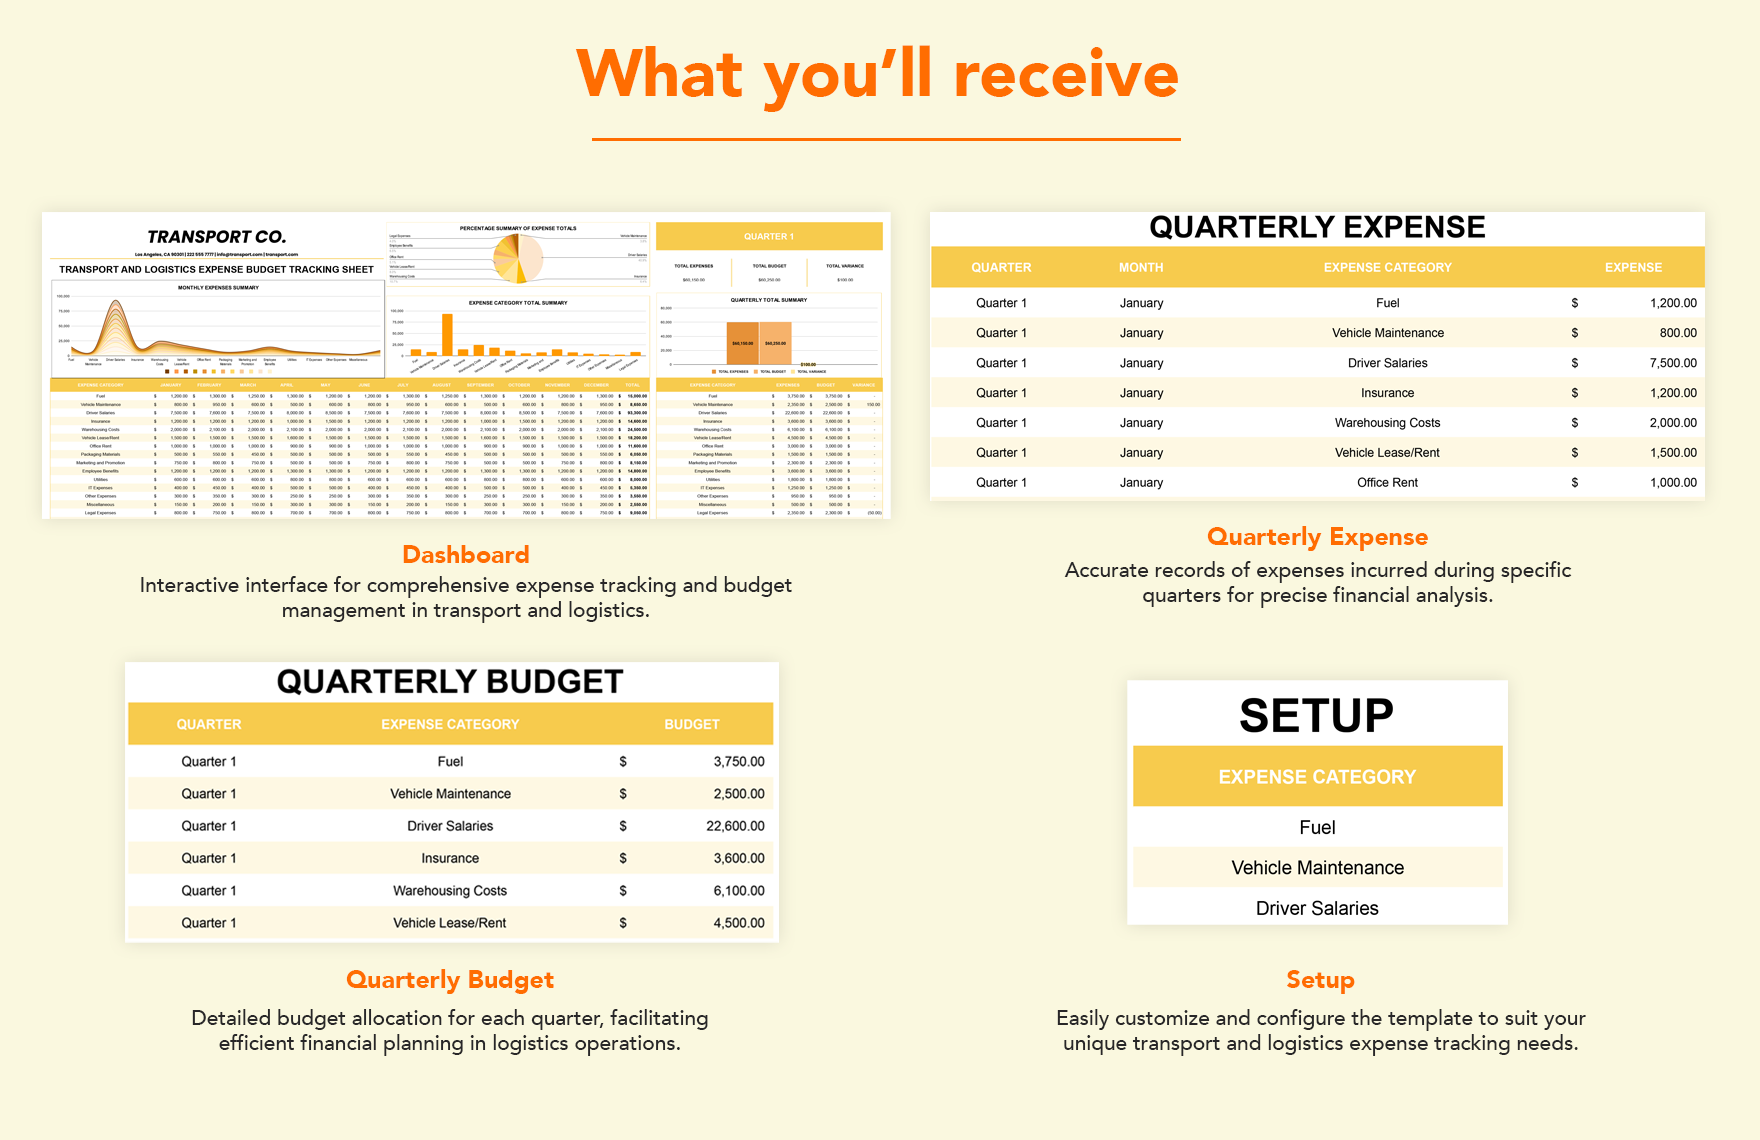 Transport and Logistics Expense Budget Tracking Sheet Template